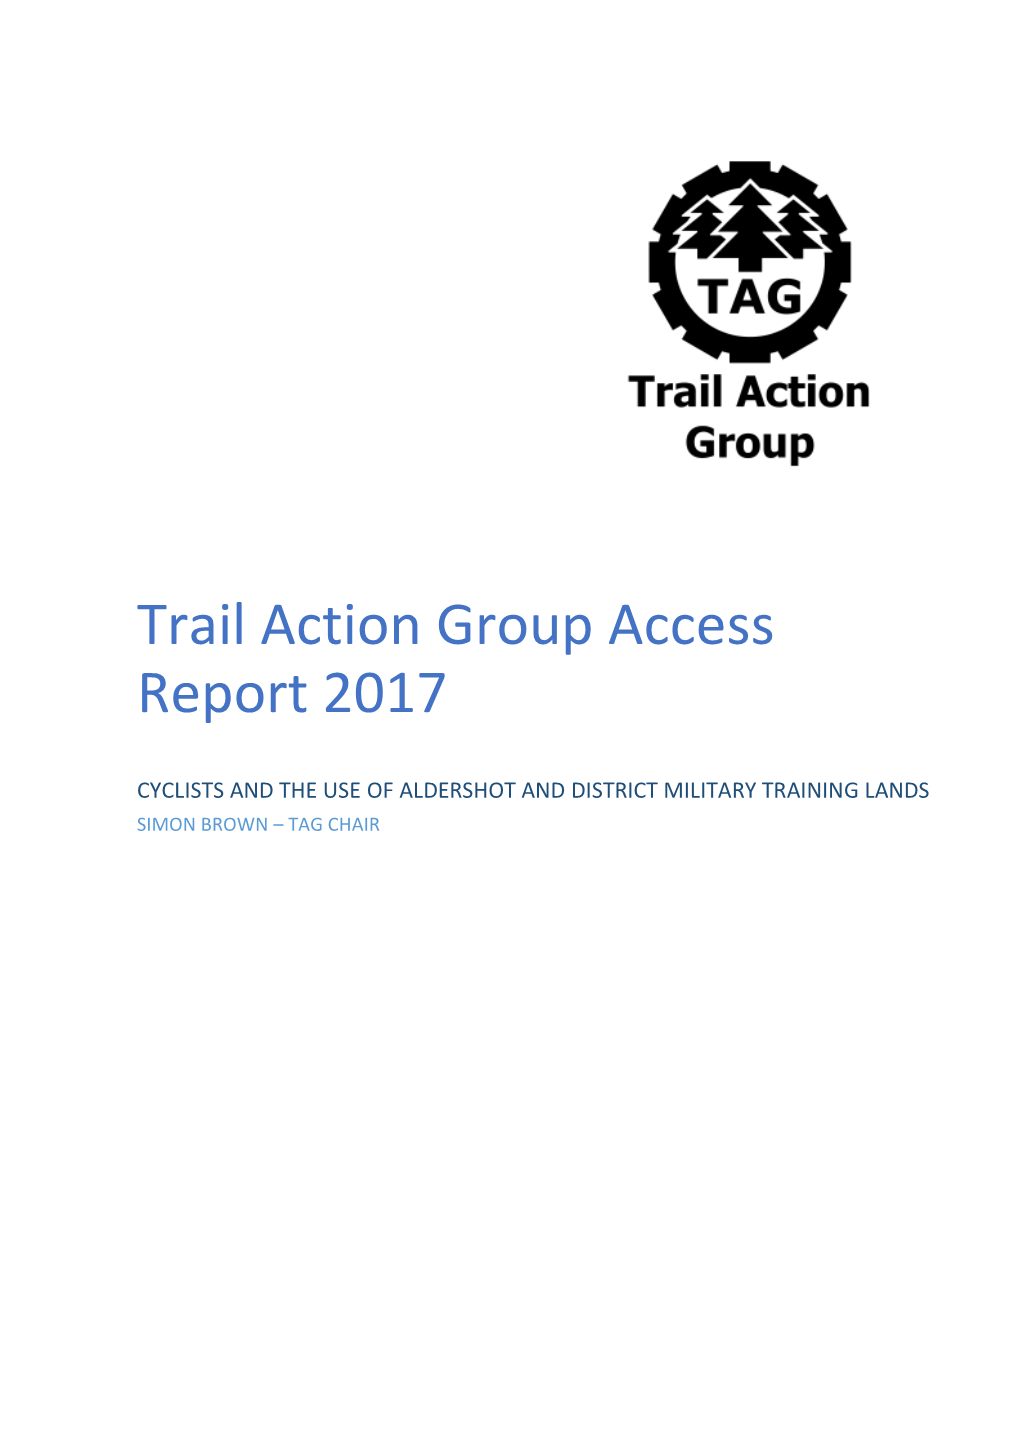 Trail Action Group Access Report 2017